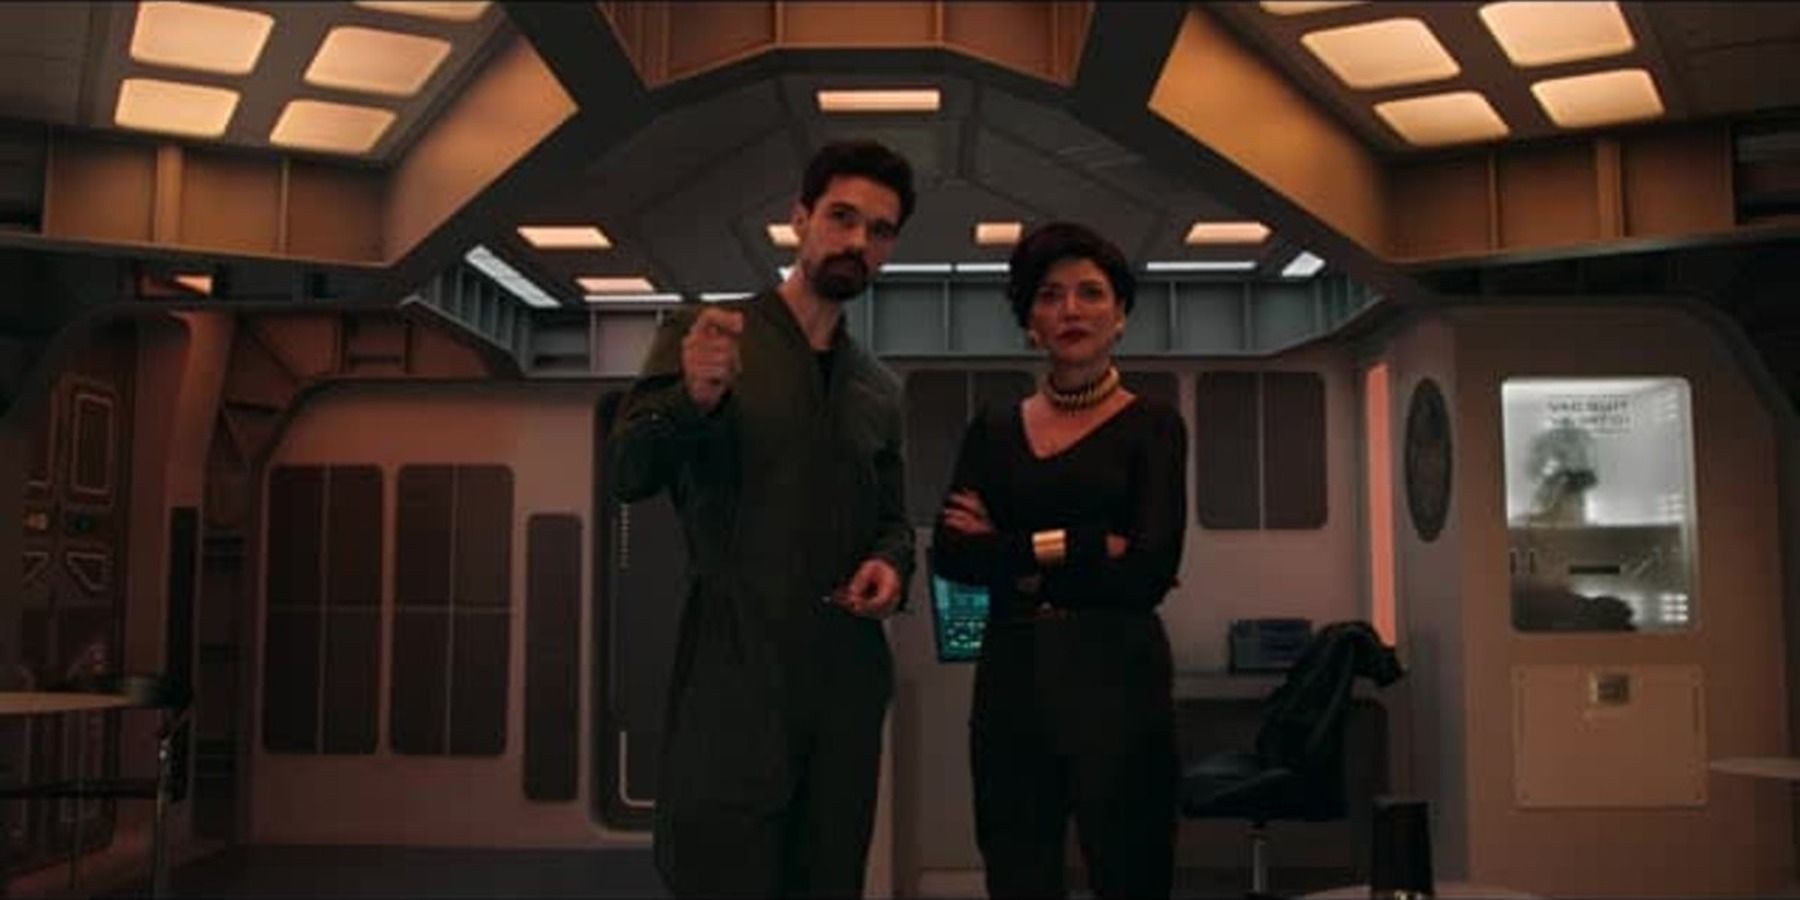 the expanse’s world is ripe for spinoffs6